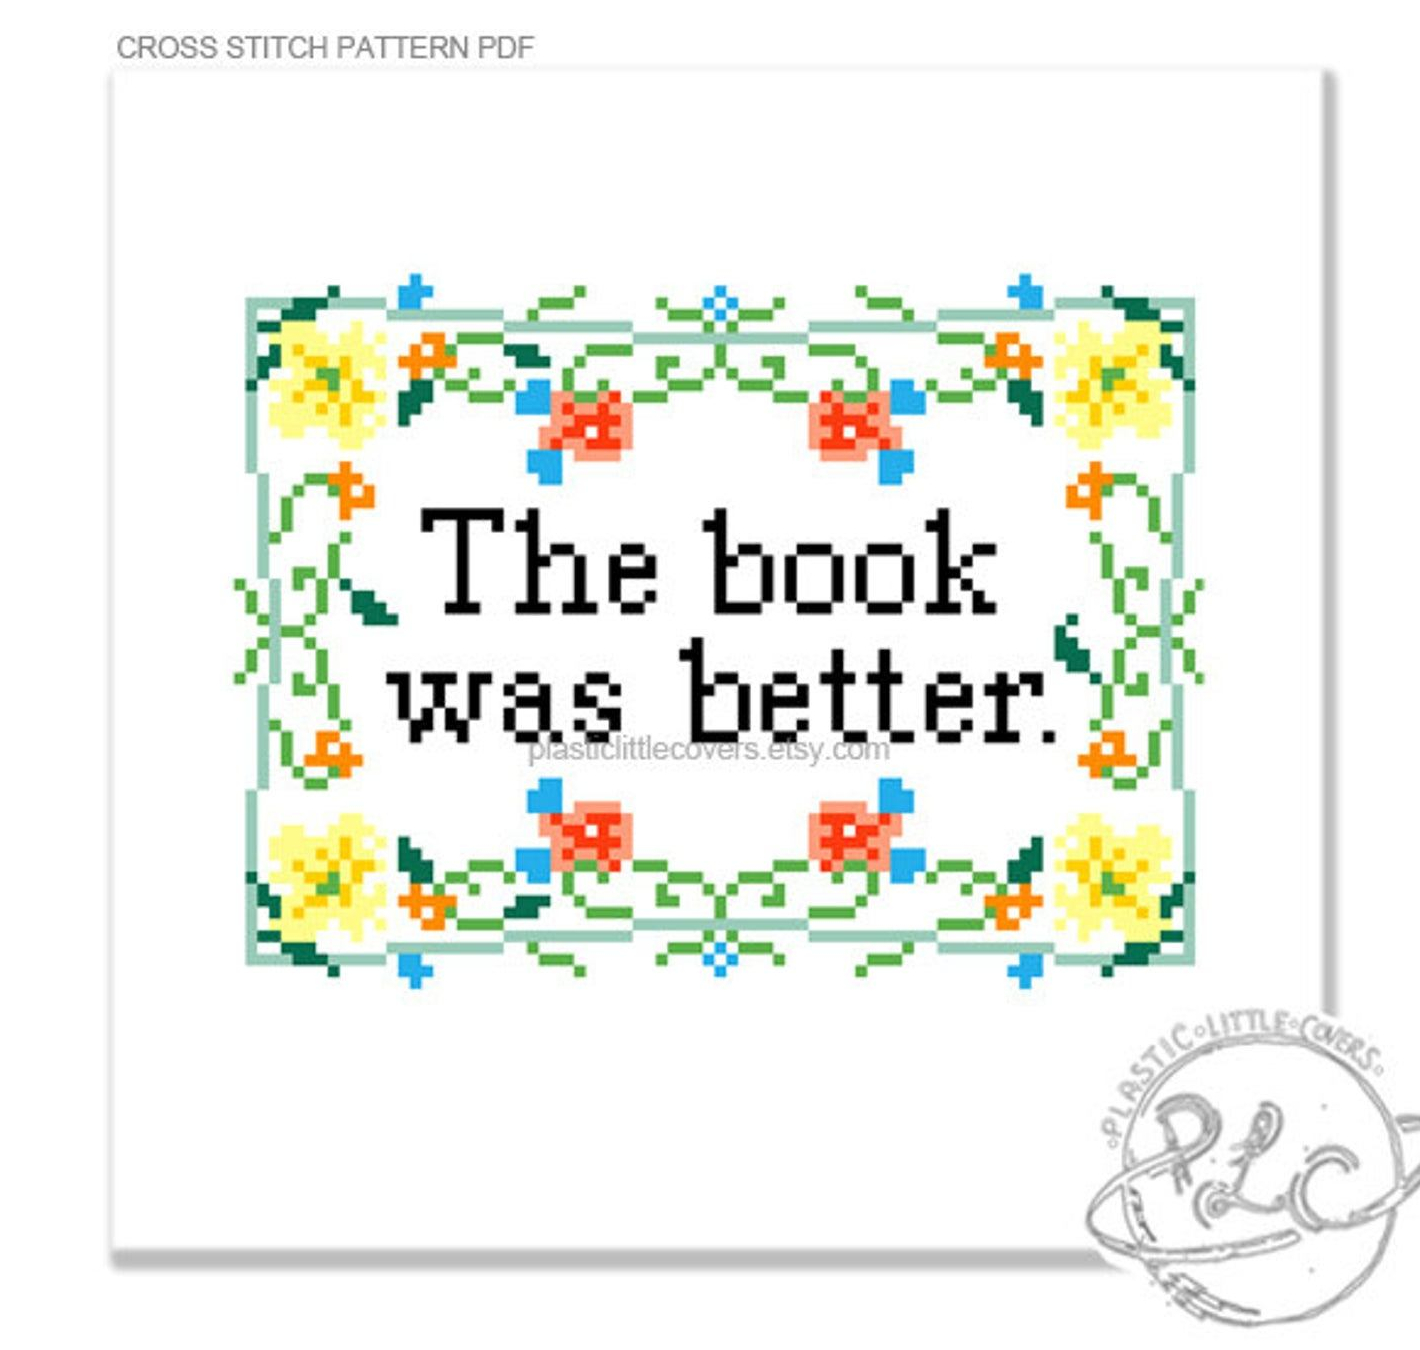 More Awesome Literary Embroidery, blog post by Aspasia S. Bissas, needlepoint, embroidery, cross-stitch, cross stitch, crossstitch, patterns, free patterns, books, reading, bookish, literary, aspasiasbissas.com, the book was better, etsy, pattern download